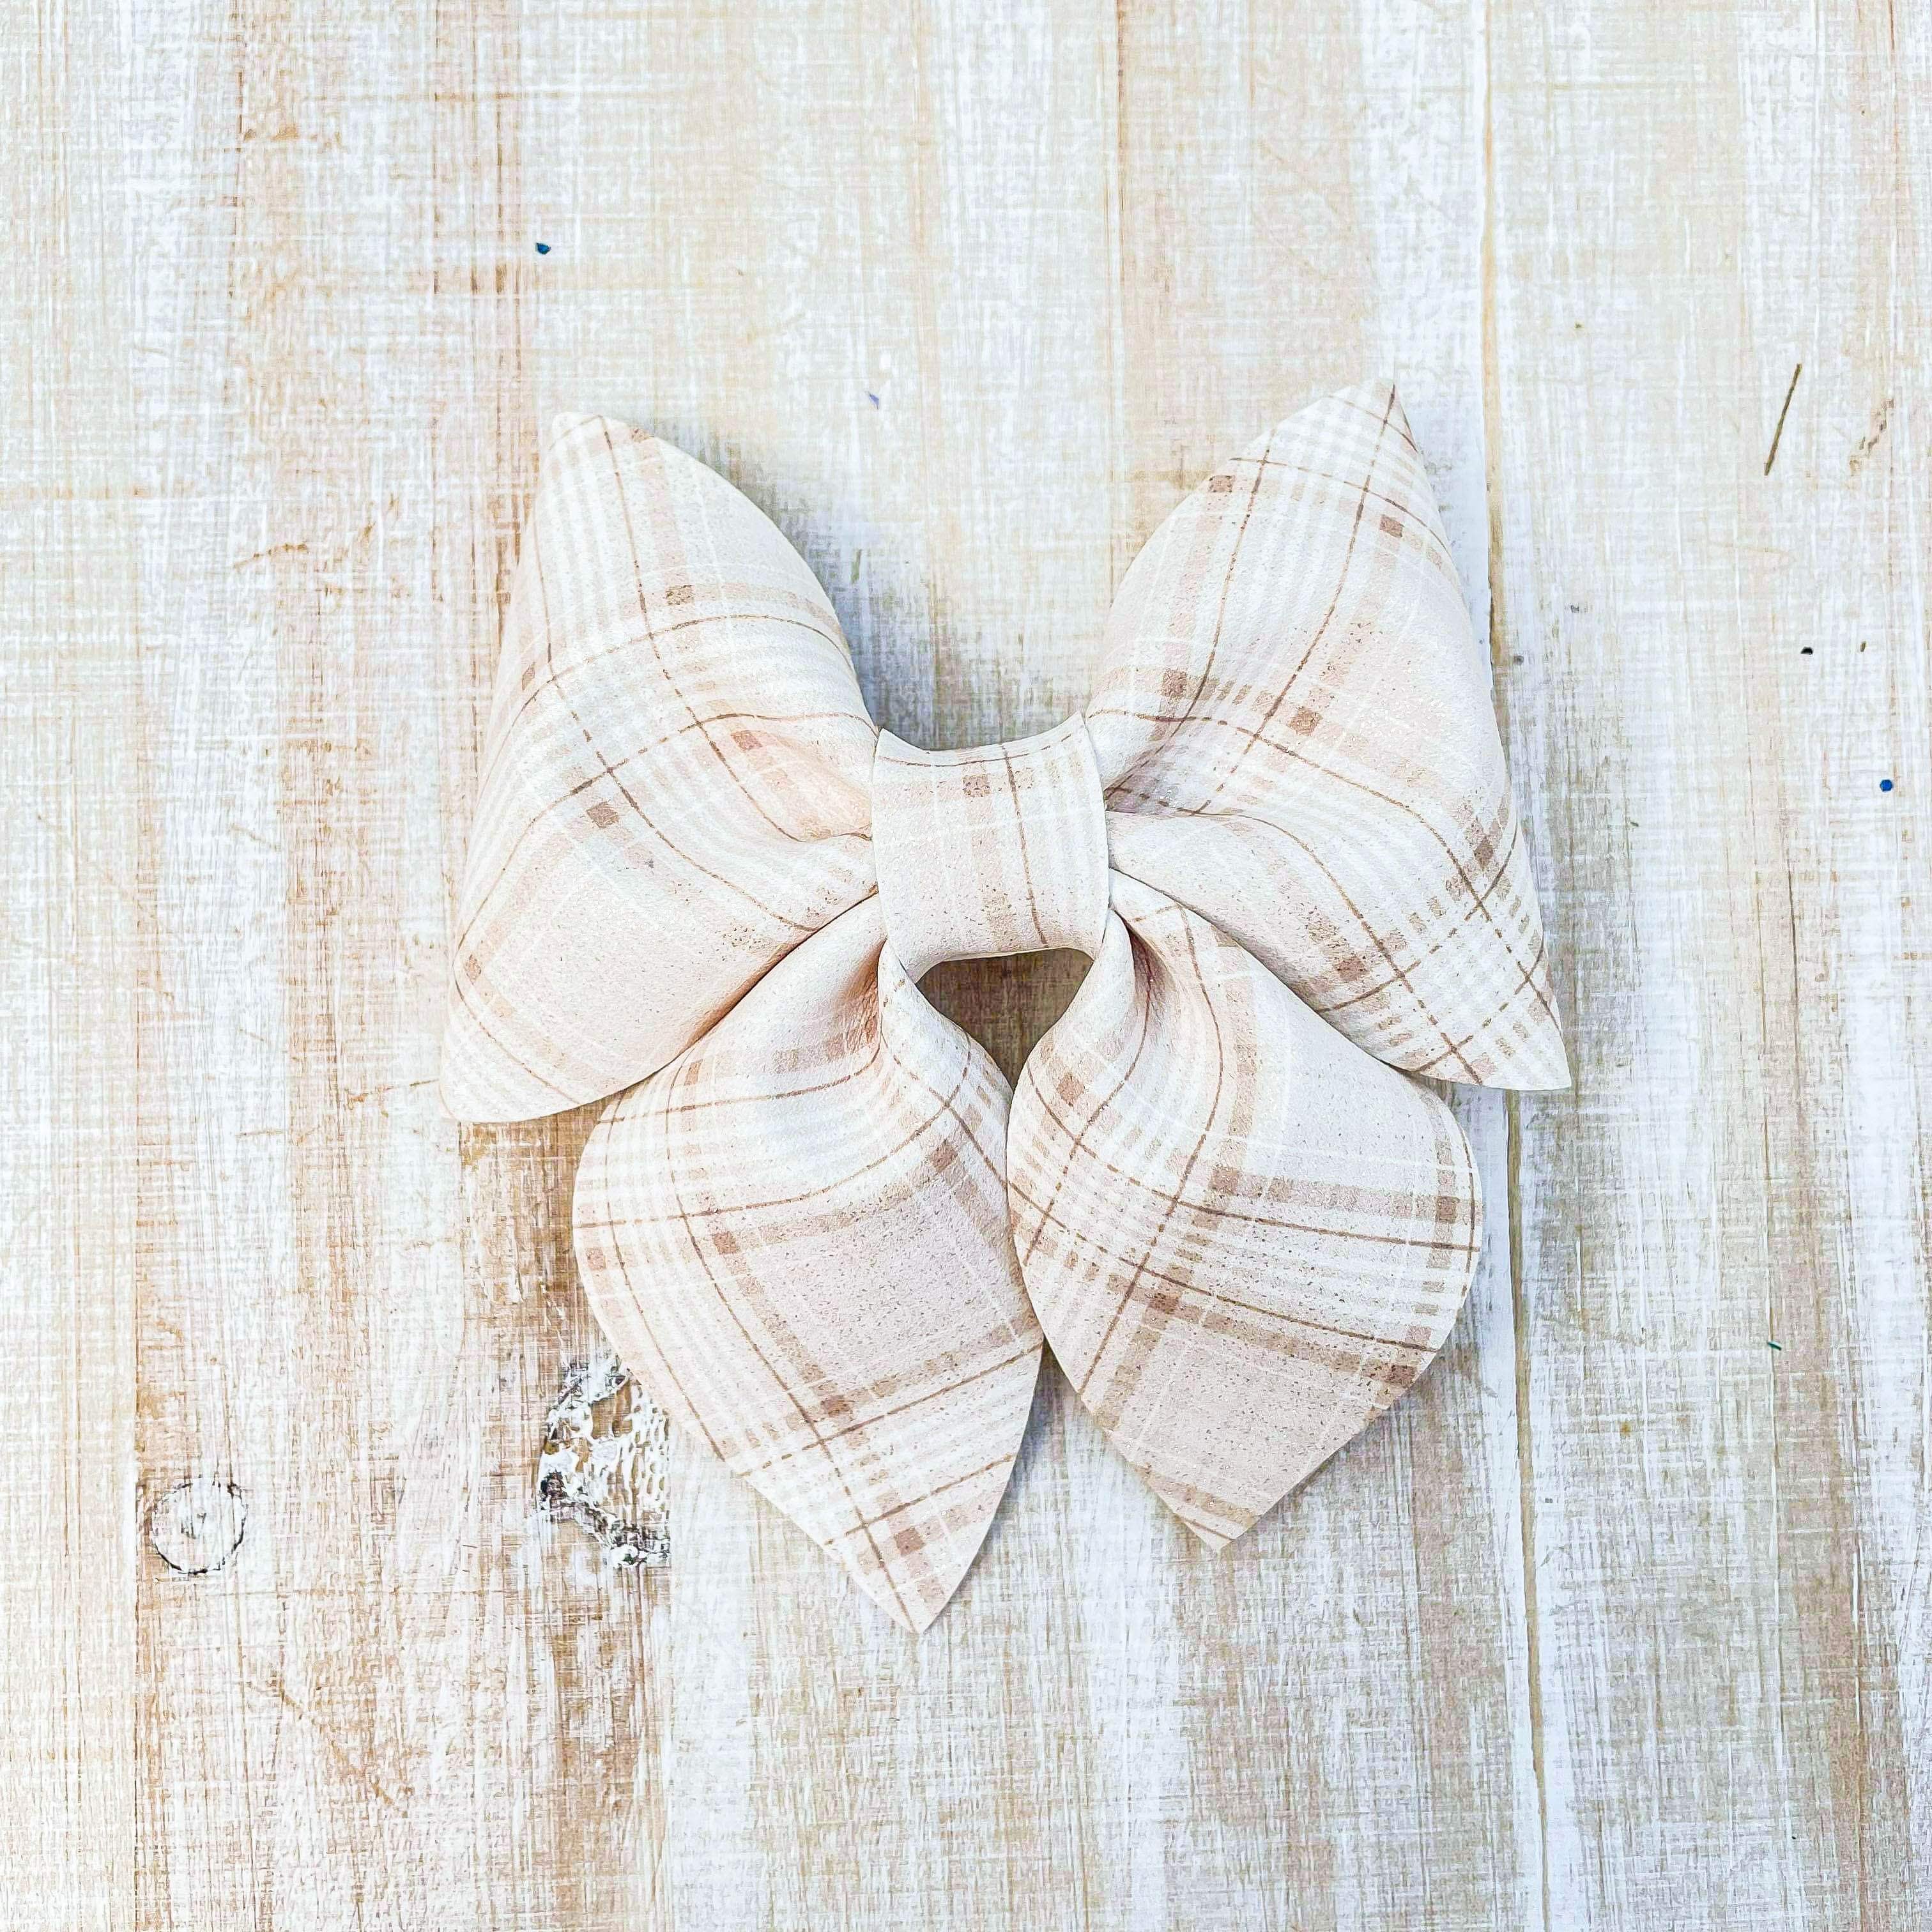 Tan and Cream Plaid Thin Lined 4 inch sailor bow